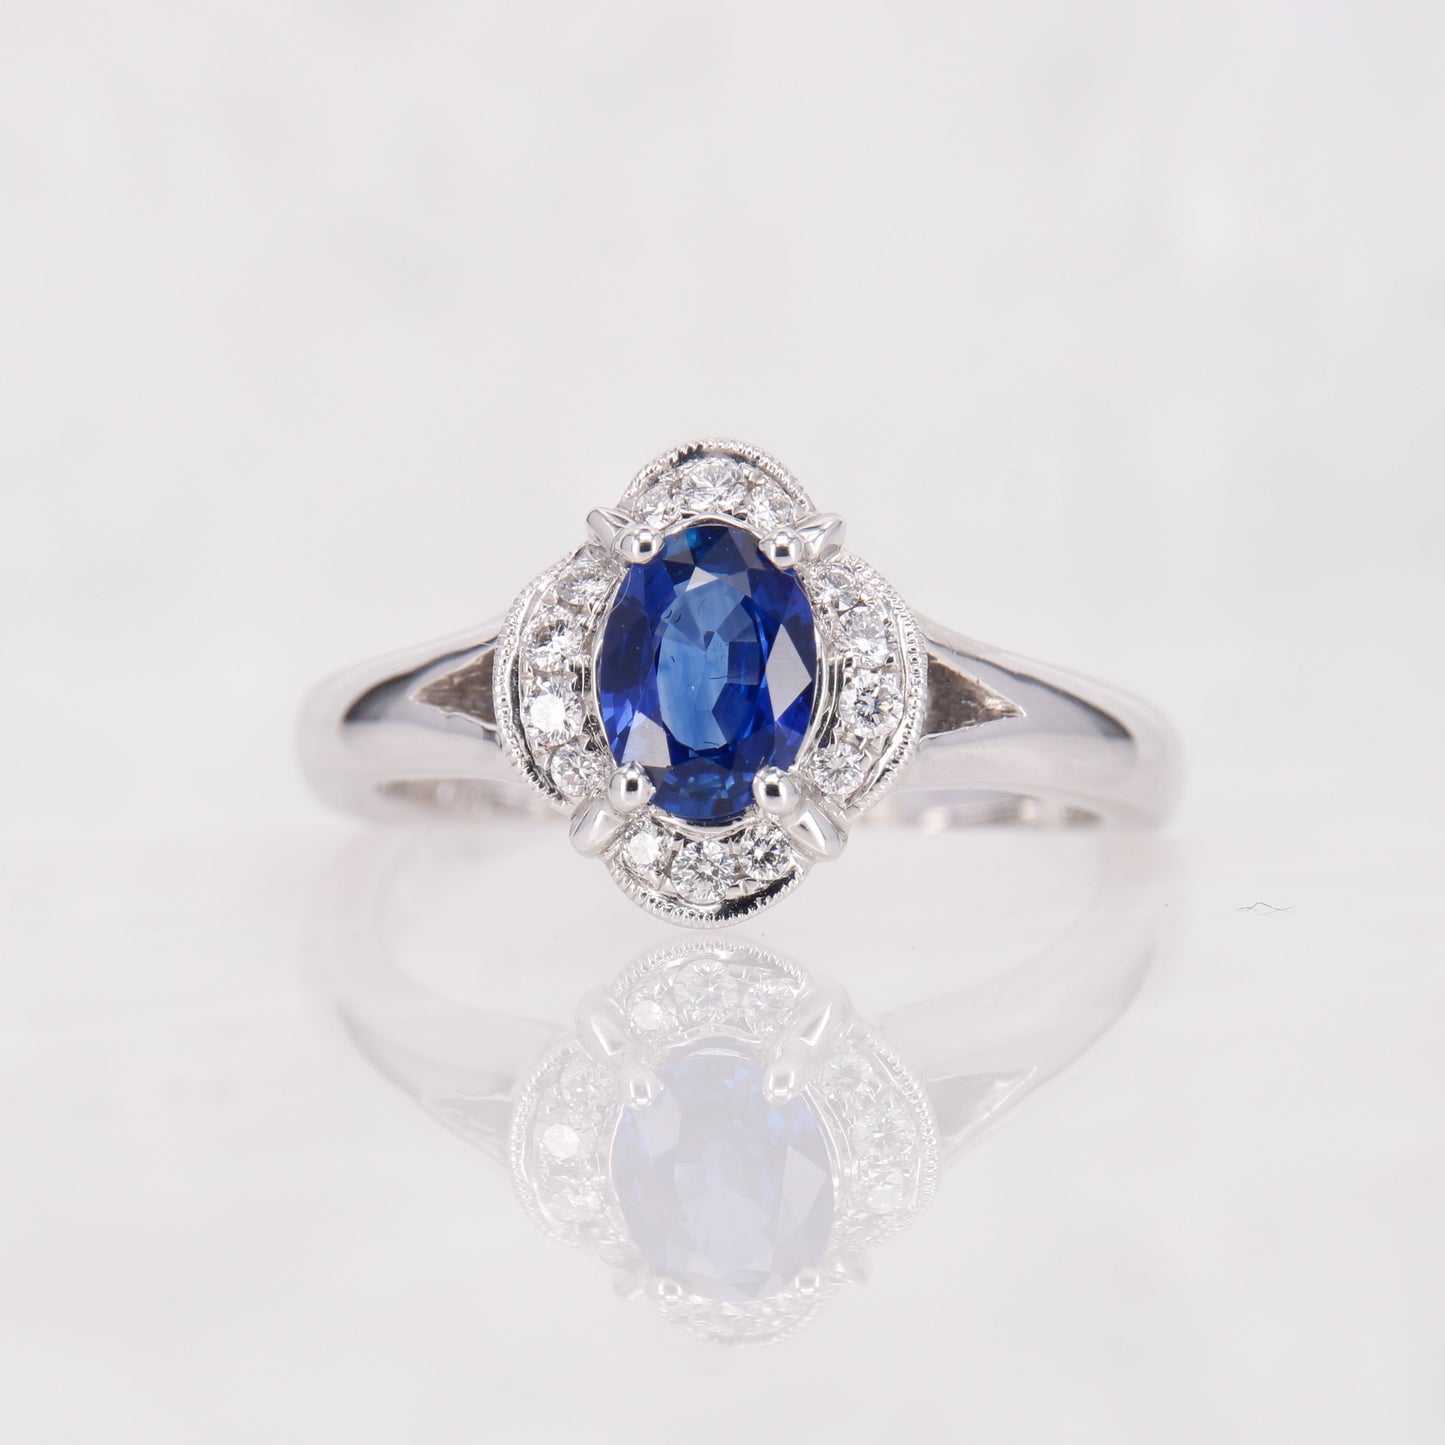 18ct White Gold Oval Cut Sapphire and Diamond Ring